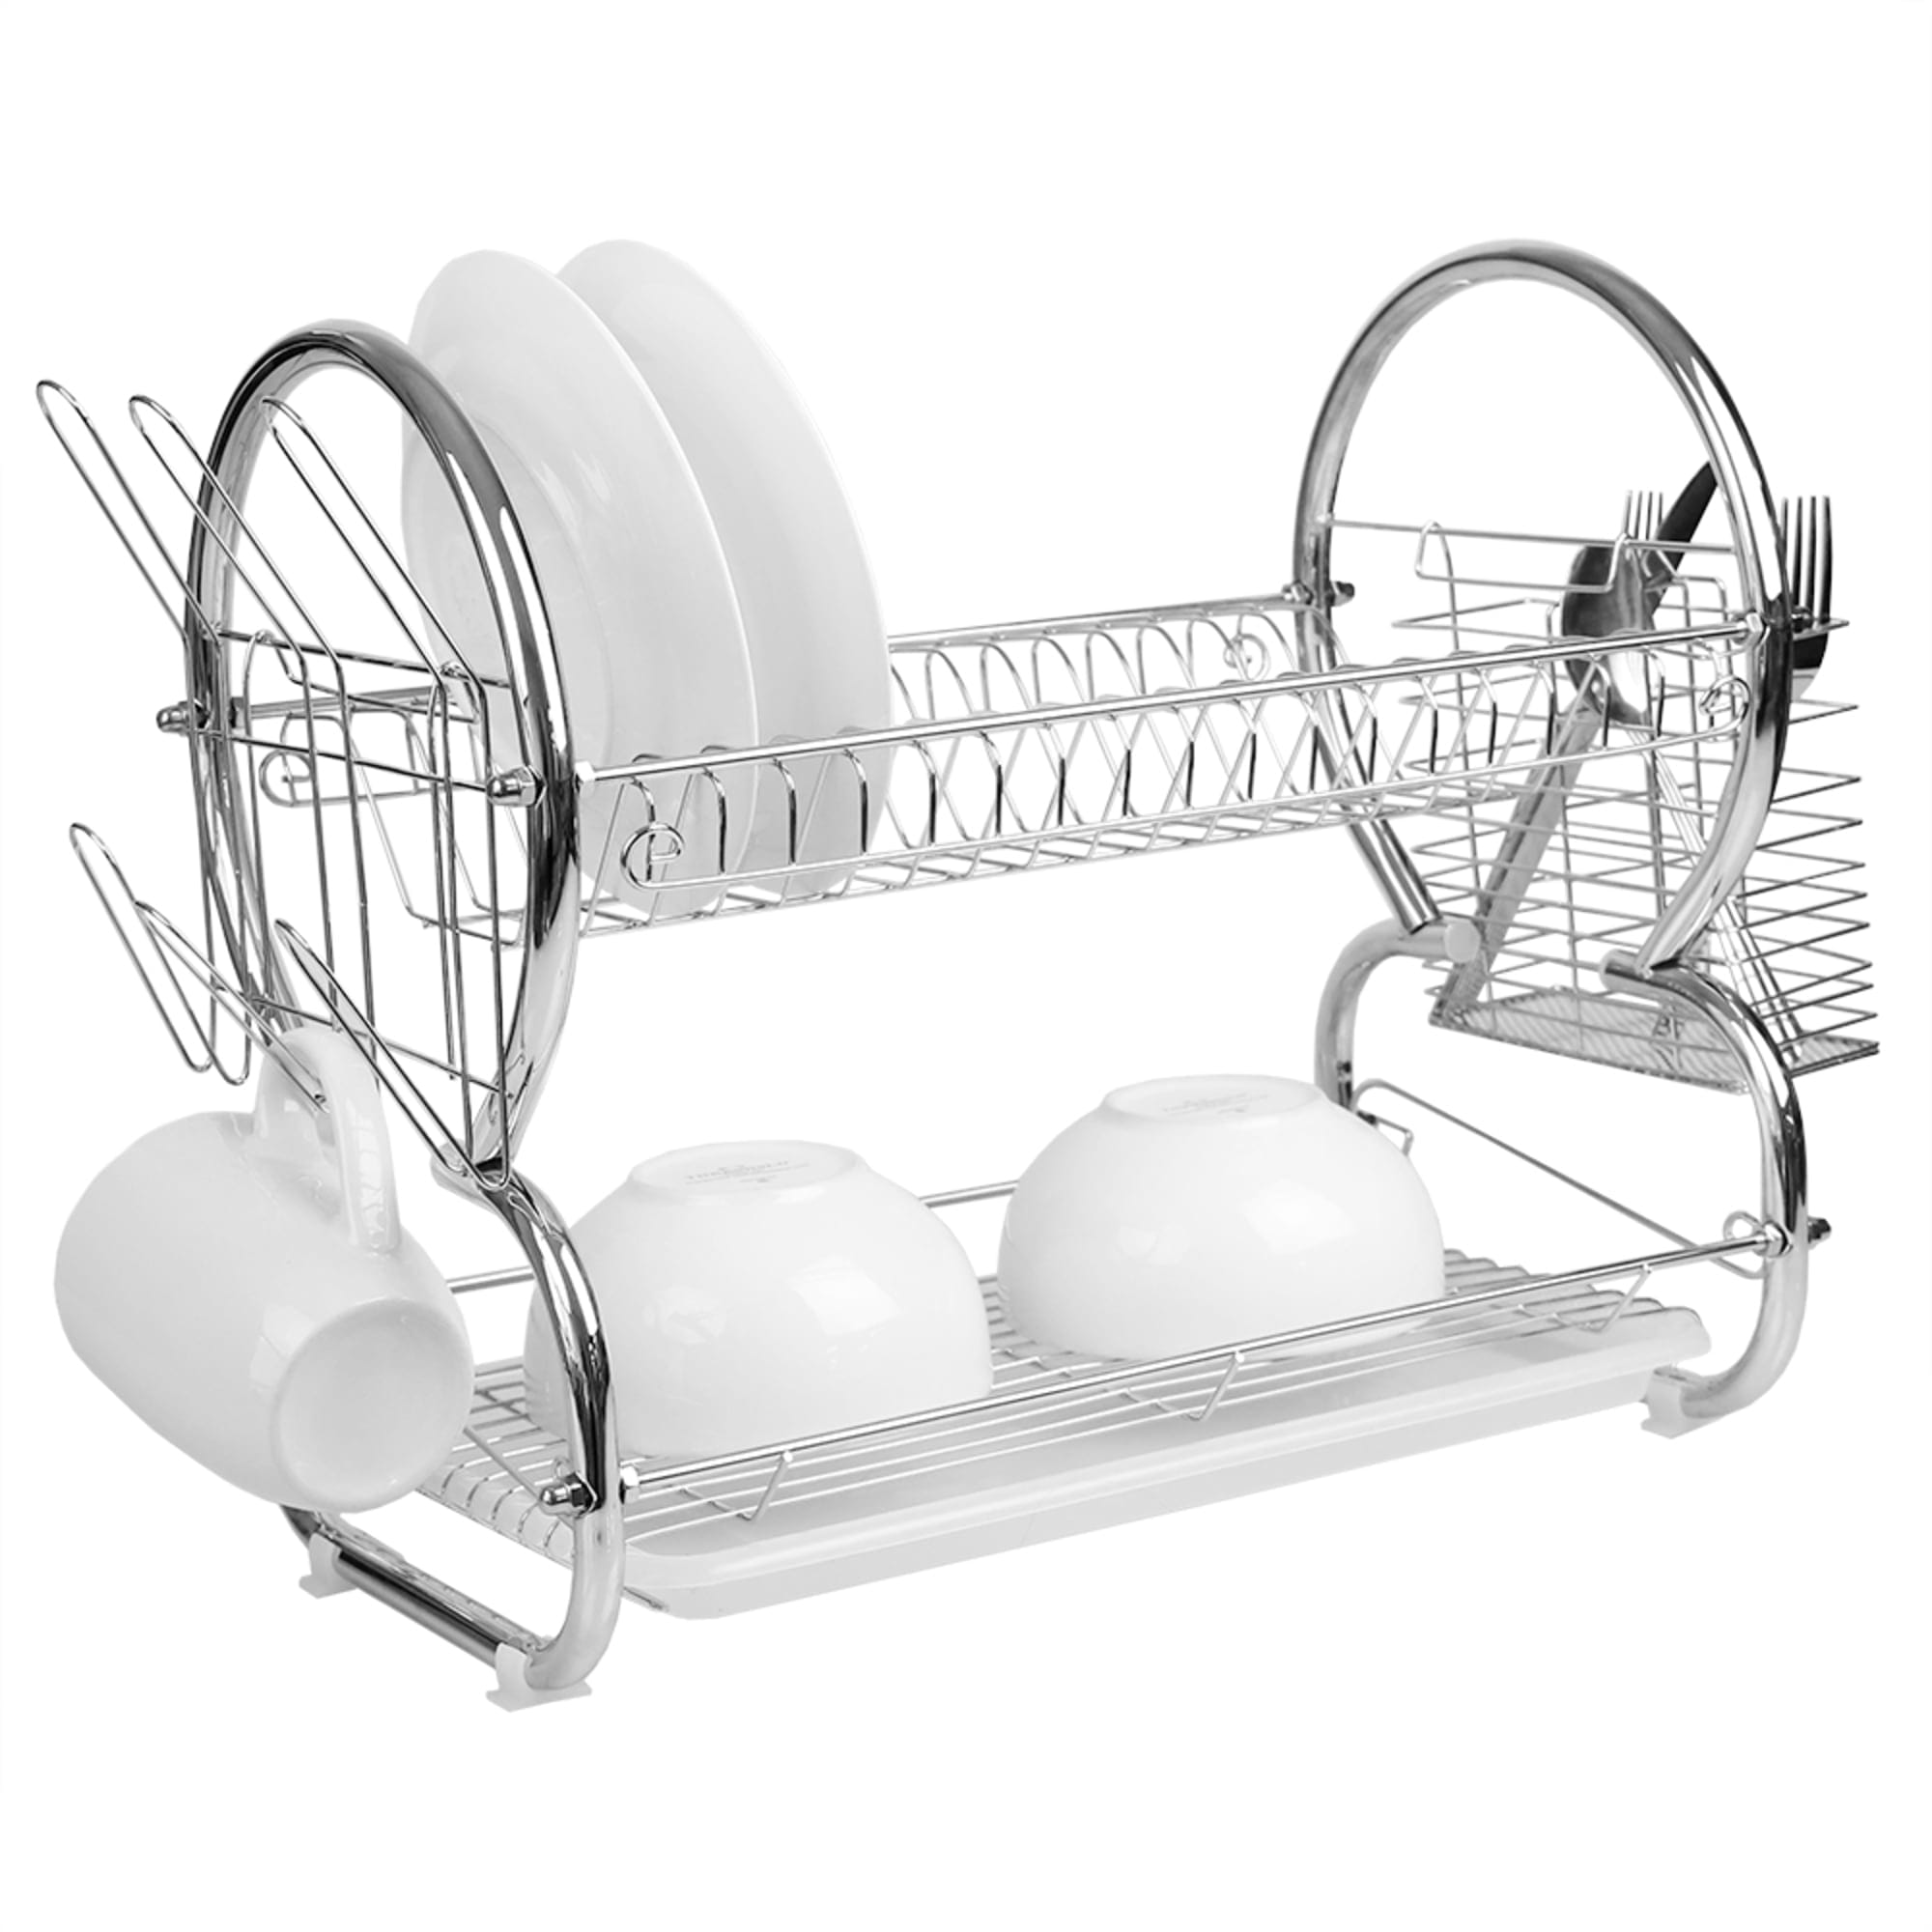 Home Basics 2-Tier Chrome Dish Drainer $15.00 EACH, CASE PACK OF 6